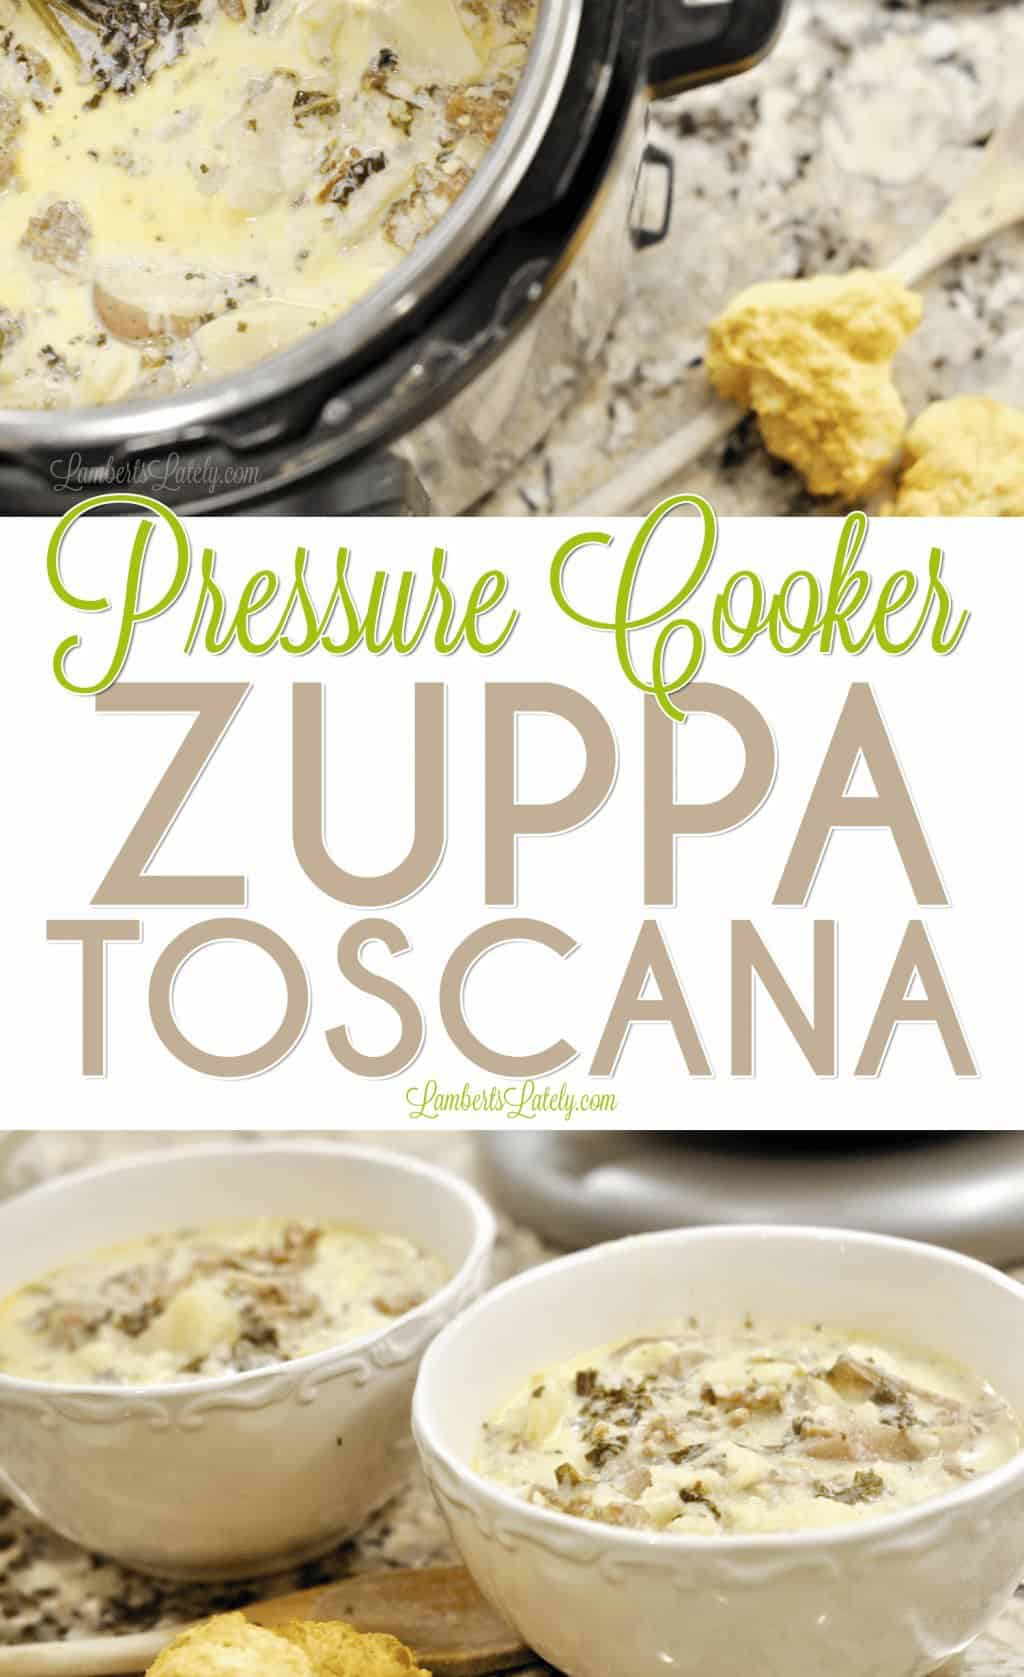 This easy copycat recipe for Pressure Cooker Zuppa Toscana can be made in the Instant Pot and is loaded with big flavors - sausage, bacon, and kale make it delicious!